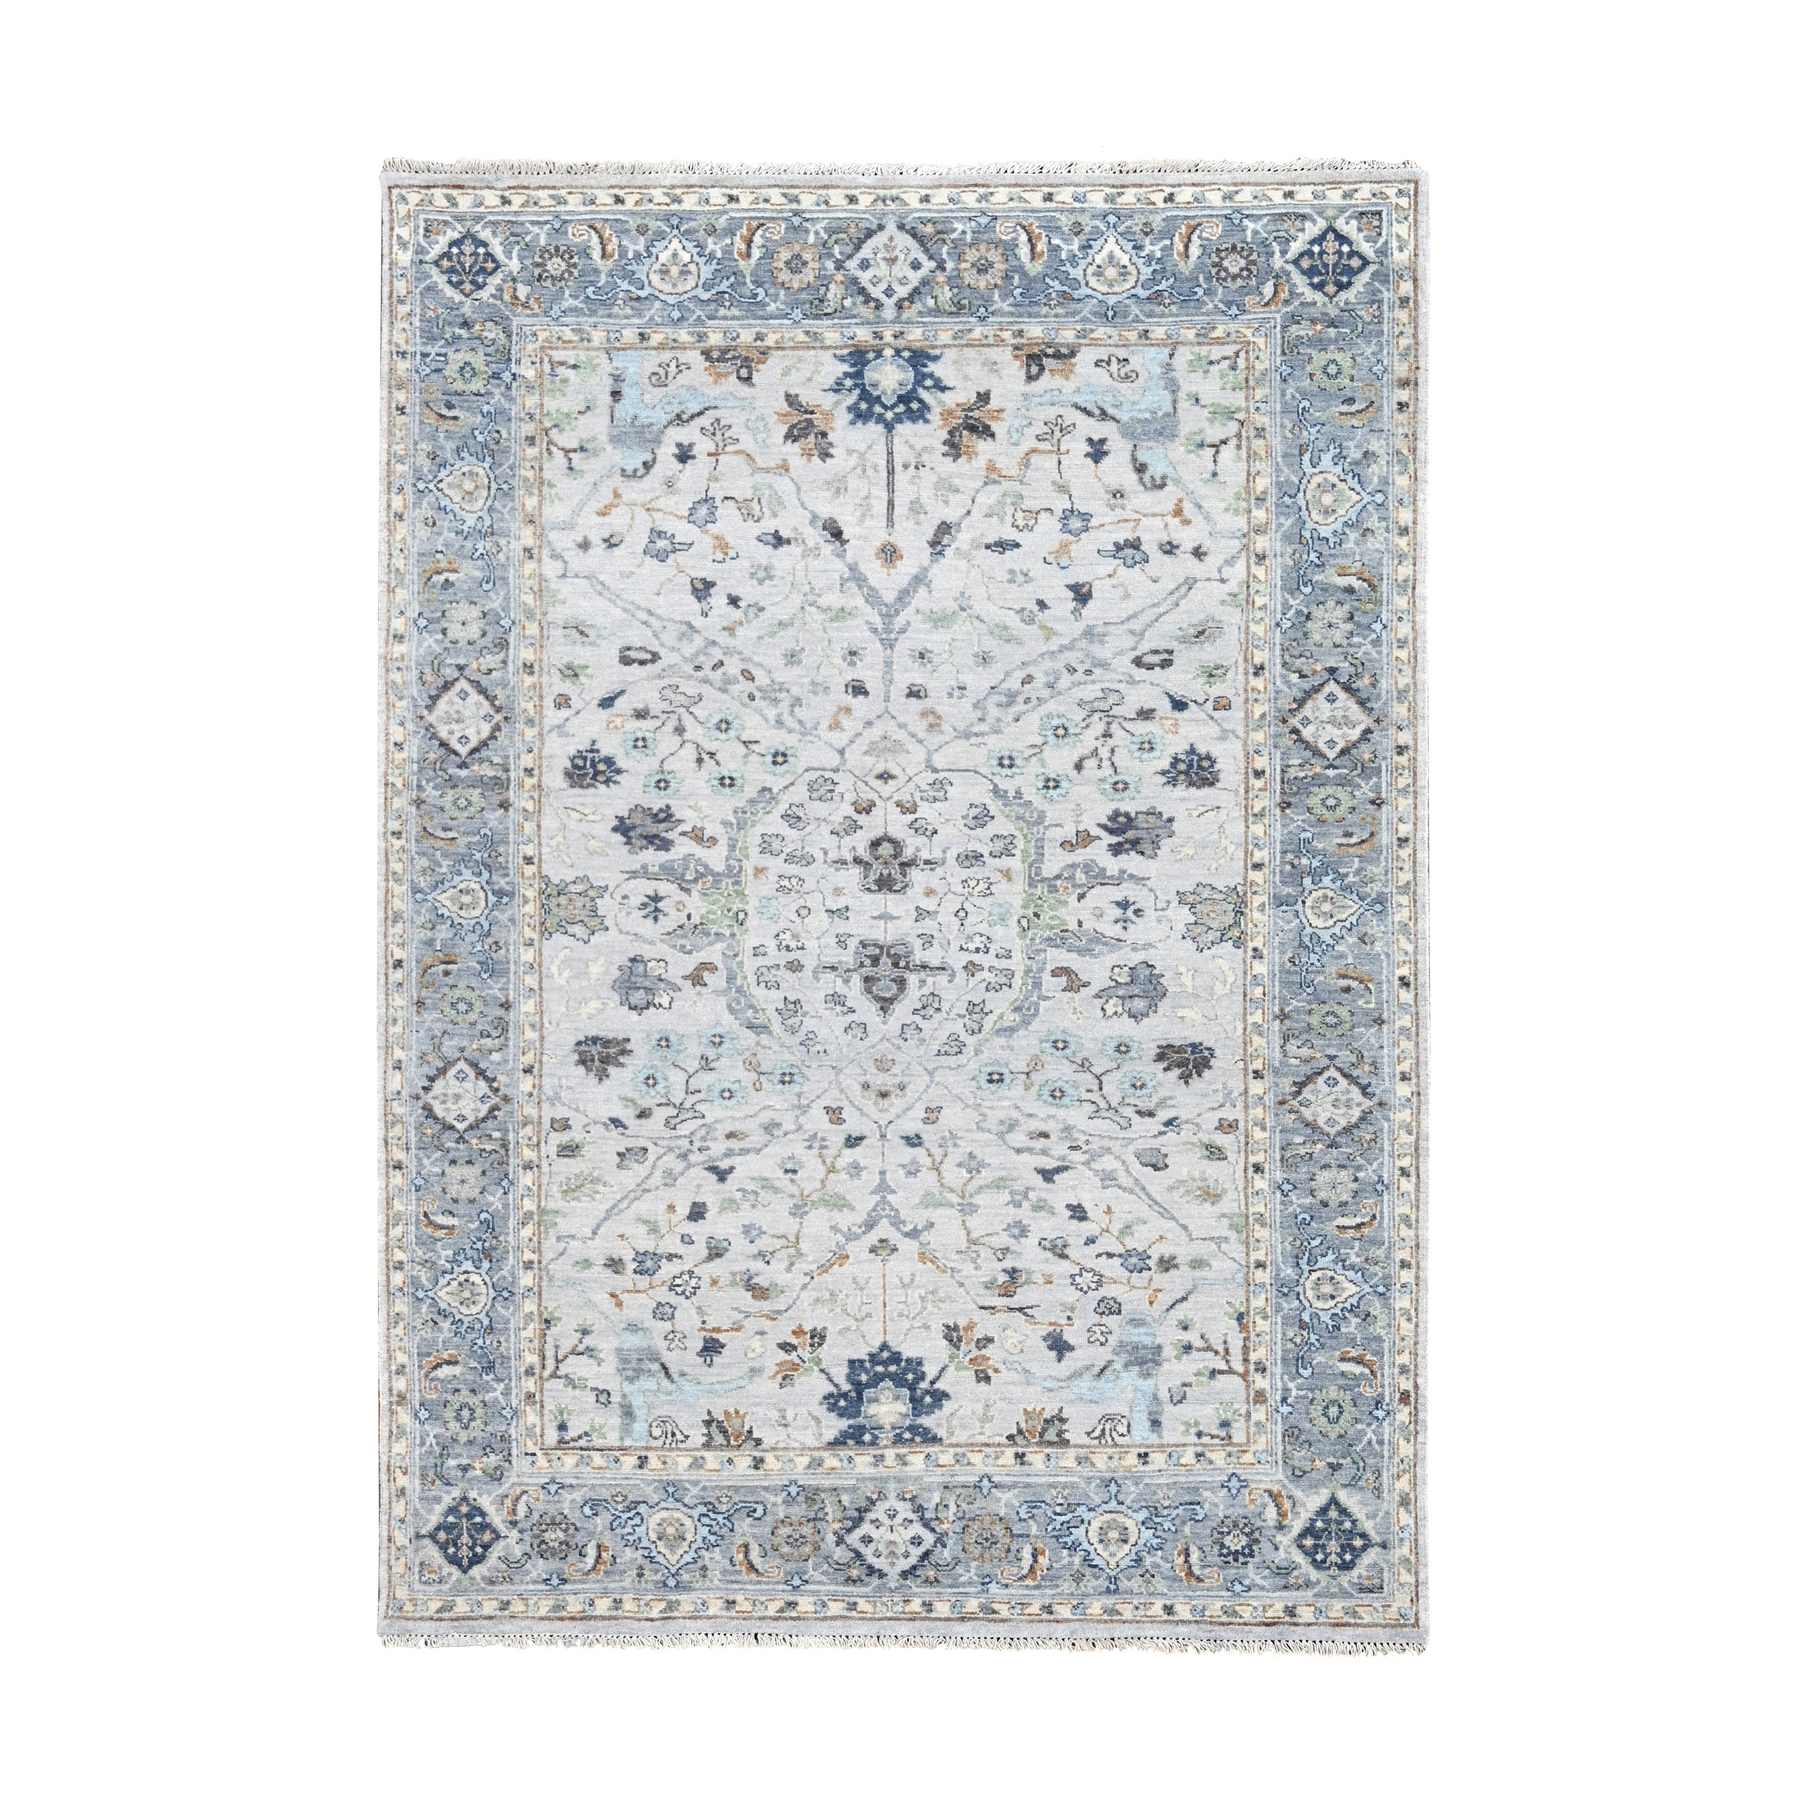 Abbey Stone Gray, All Over Floral Motifs Design Densely Woven, Natural Dyes, Hand Knotted Oushak 100% Wool, Oriental Rug